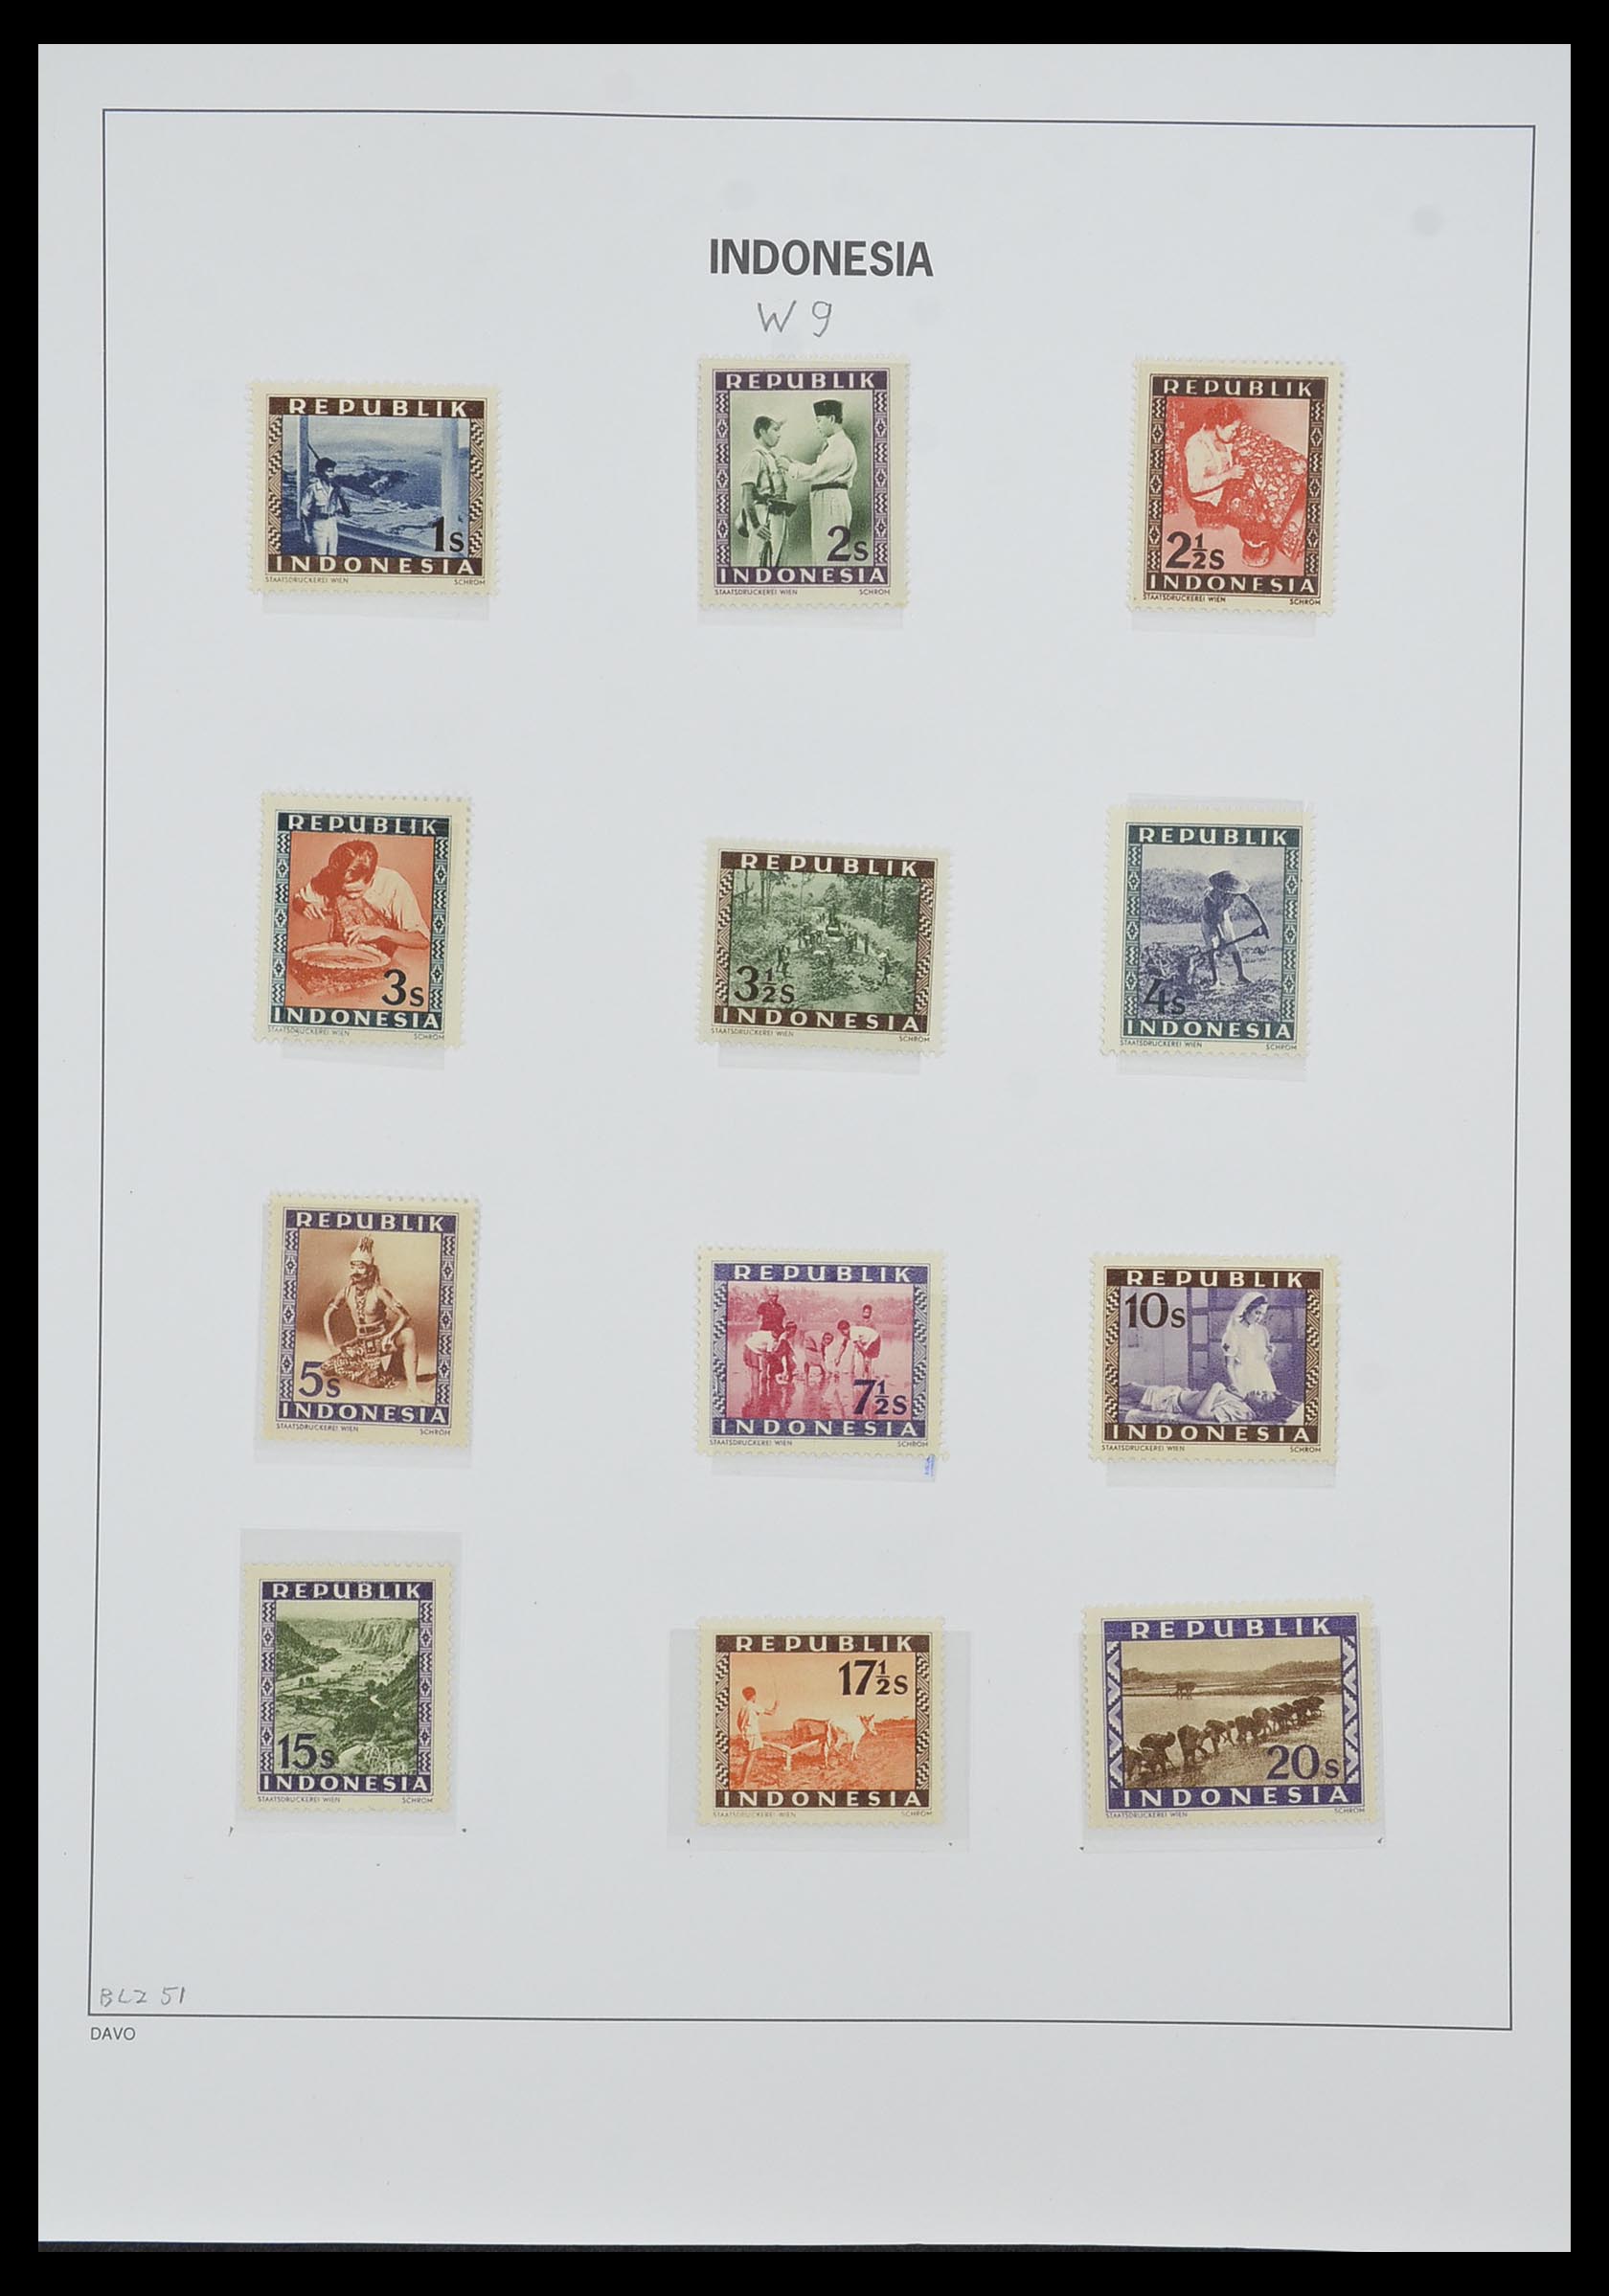 33988 019 - Stamp collection 33988 Vienna printings Indonesia.